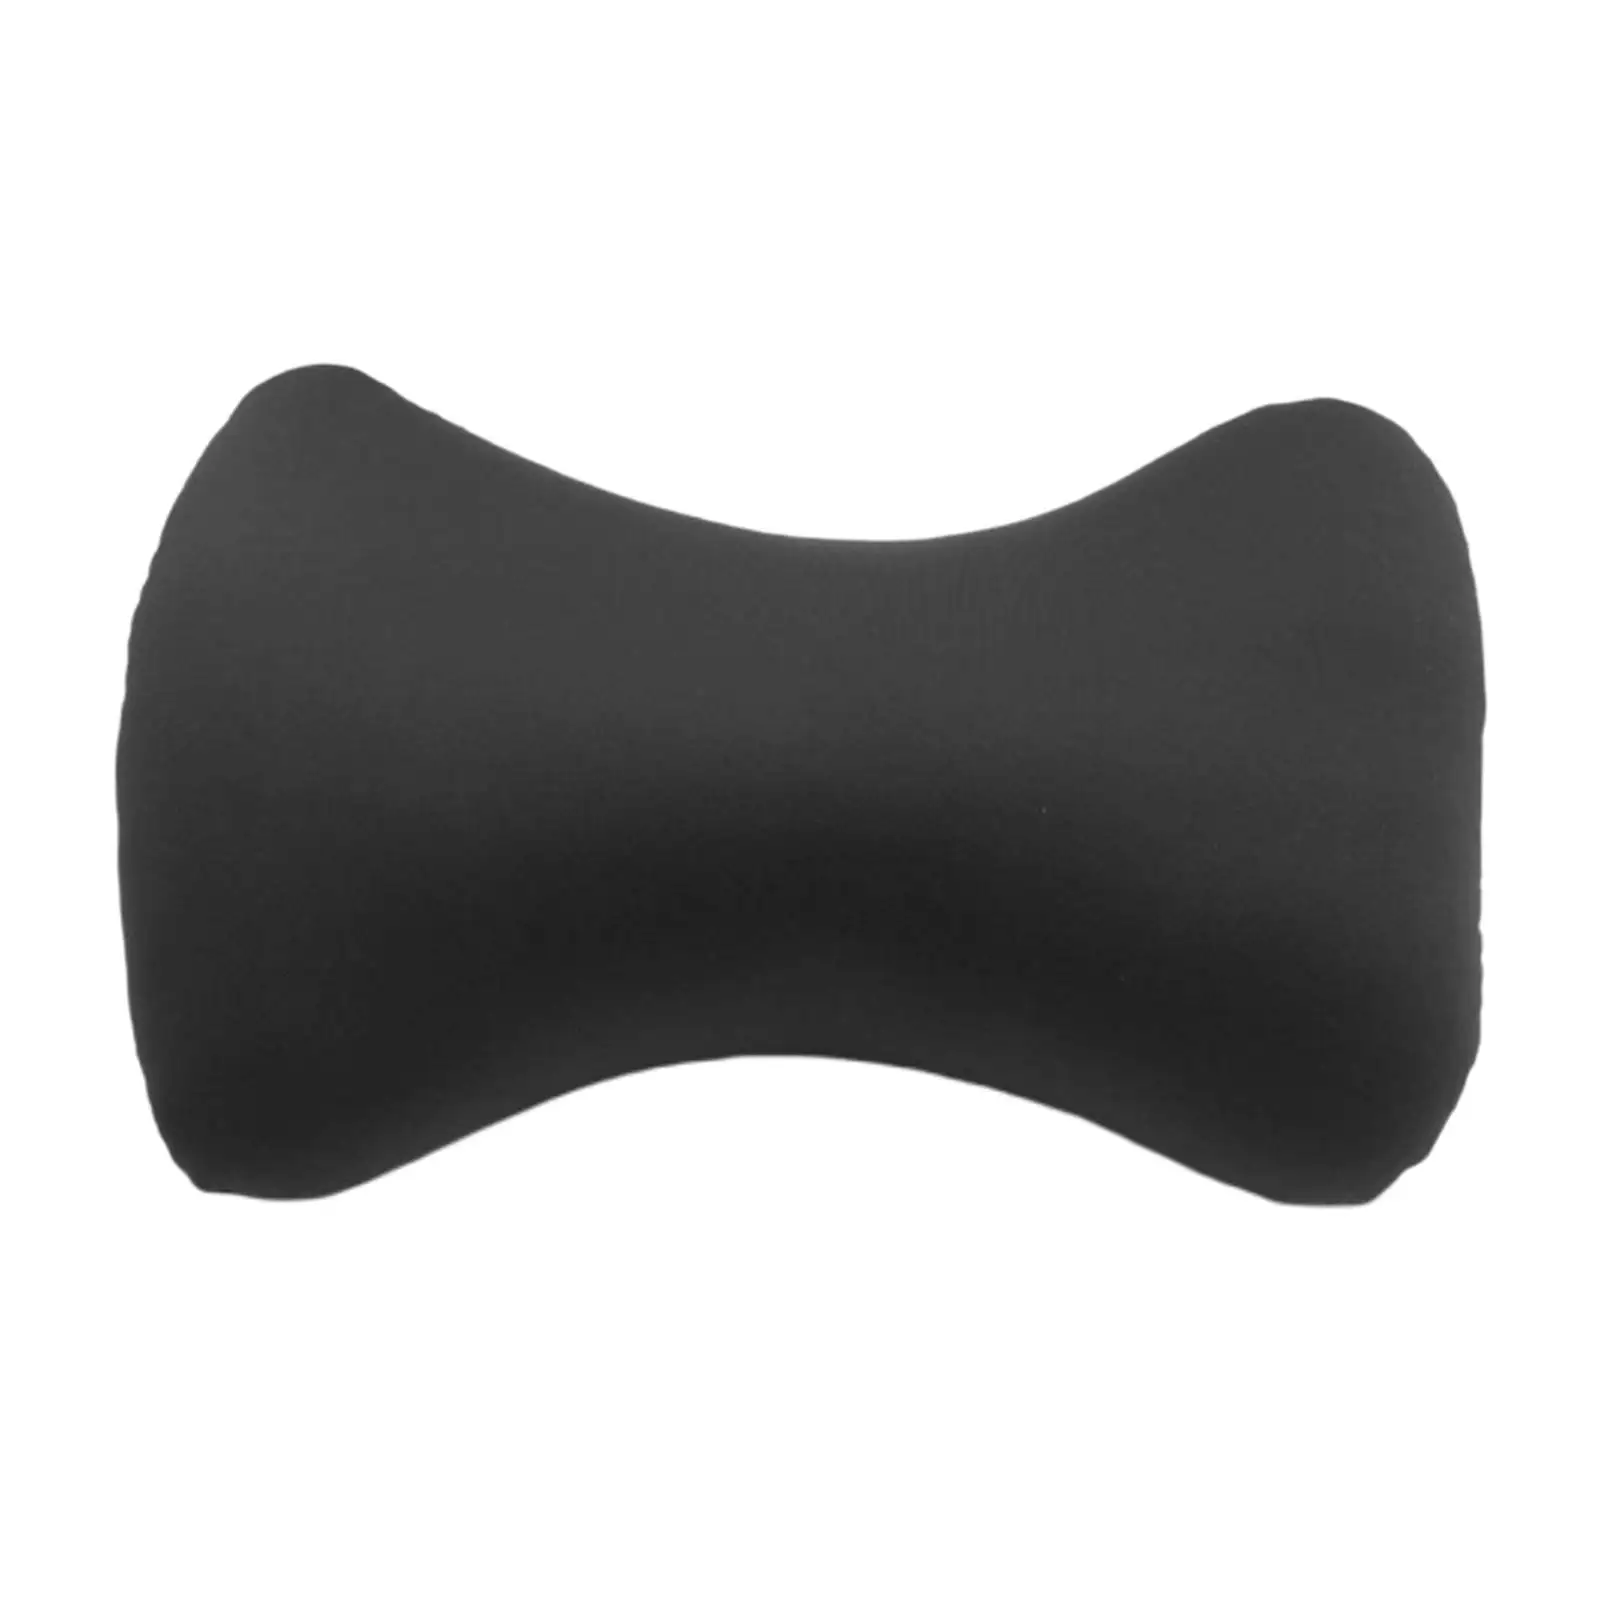 Mini Roll Pillow Home Seat Head Rest Neck Support Travel Microbead Cushion Pillow Core Square Pillow Interior Home Cushion